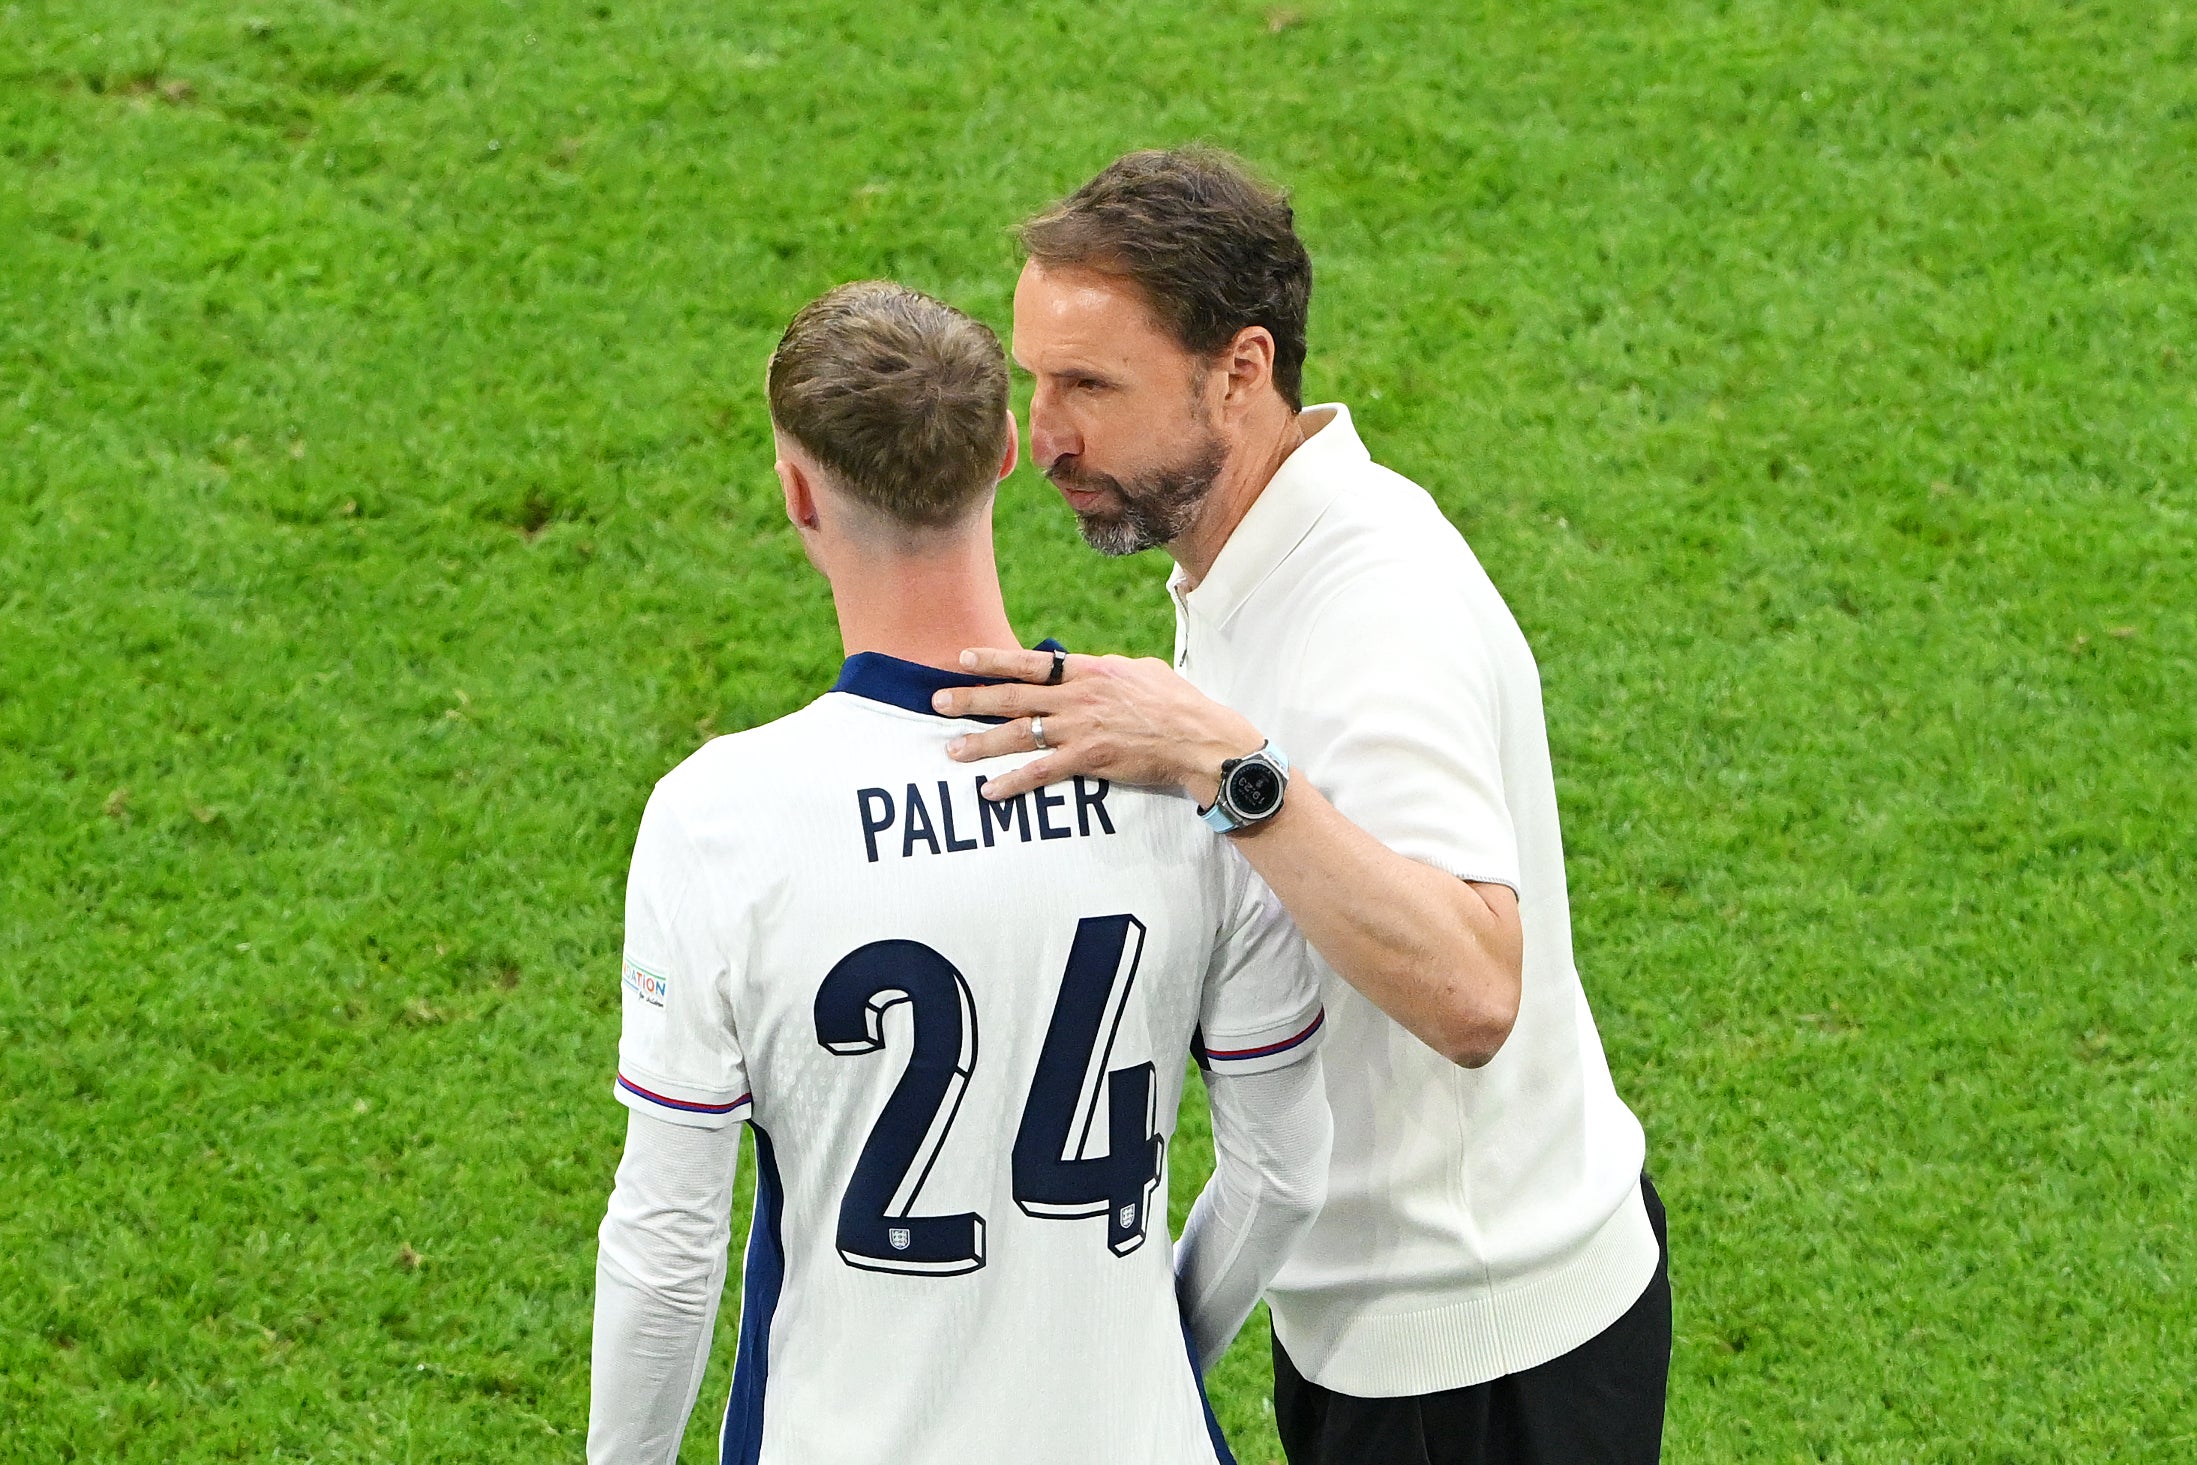 Cole Palmer has been England’s most frequent and effective substitute